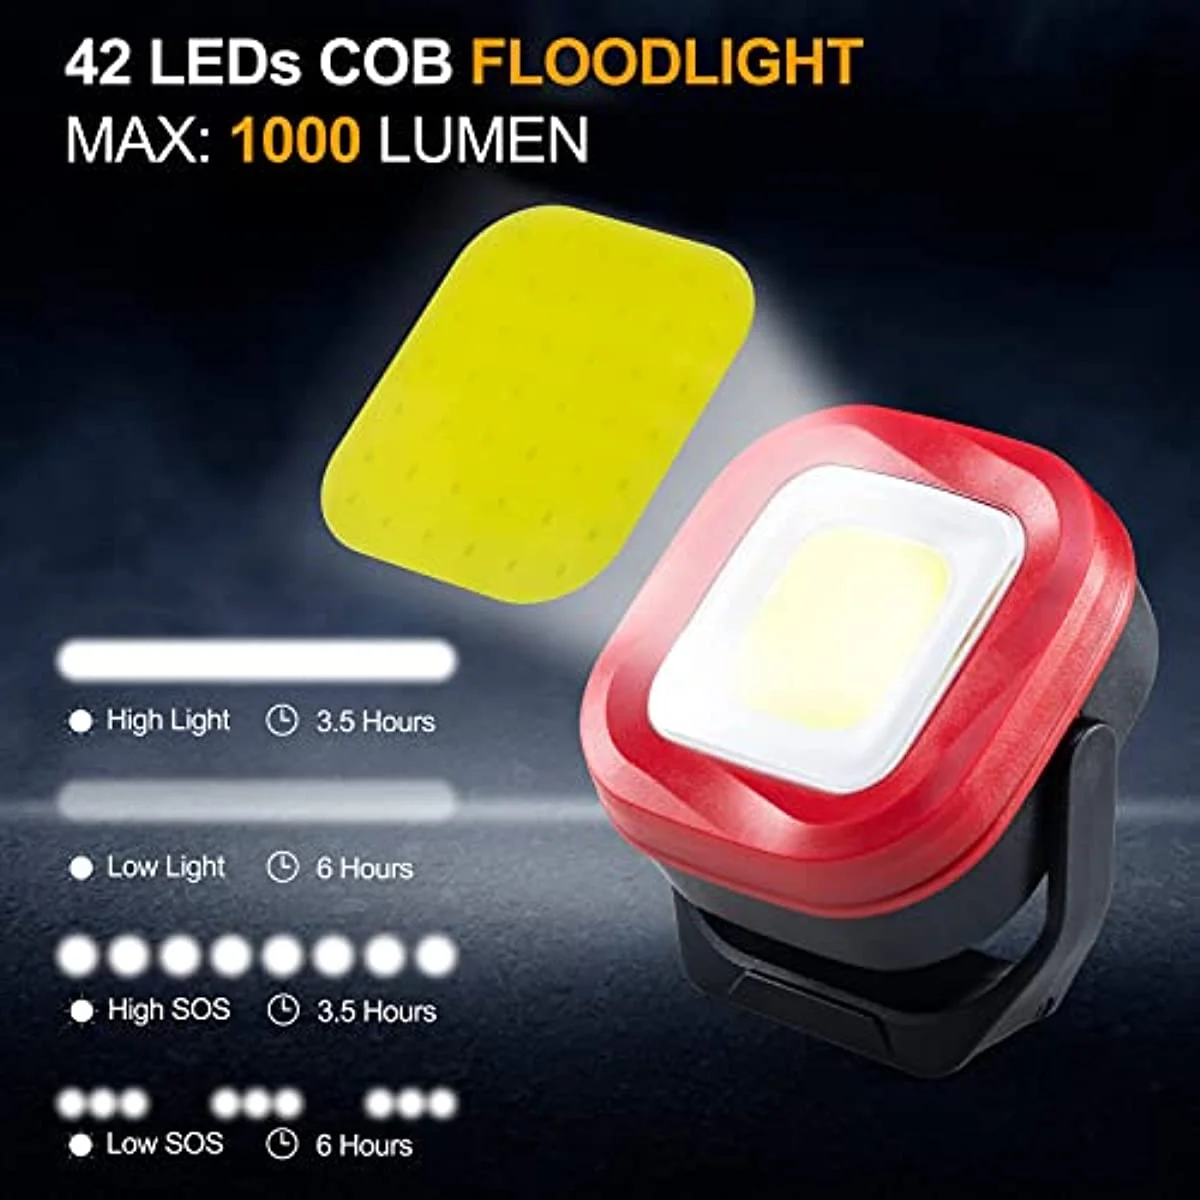 COB LED Outdoor Camping Lamp Emgerncey Lighting With Magnetic USB Recharge  1000LM Auto Repair Work Light Tent Lantern Flashlight AliExpress